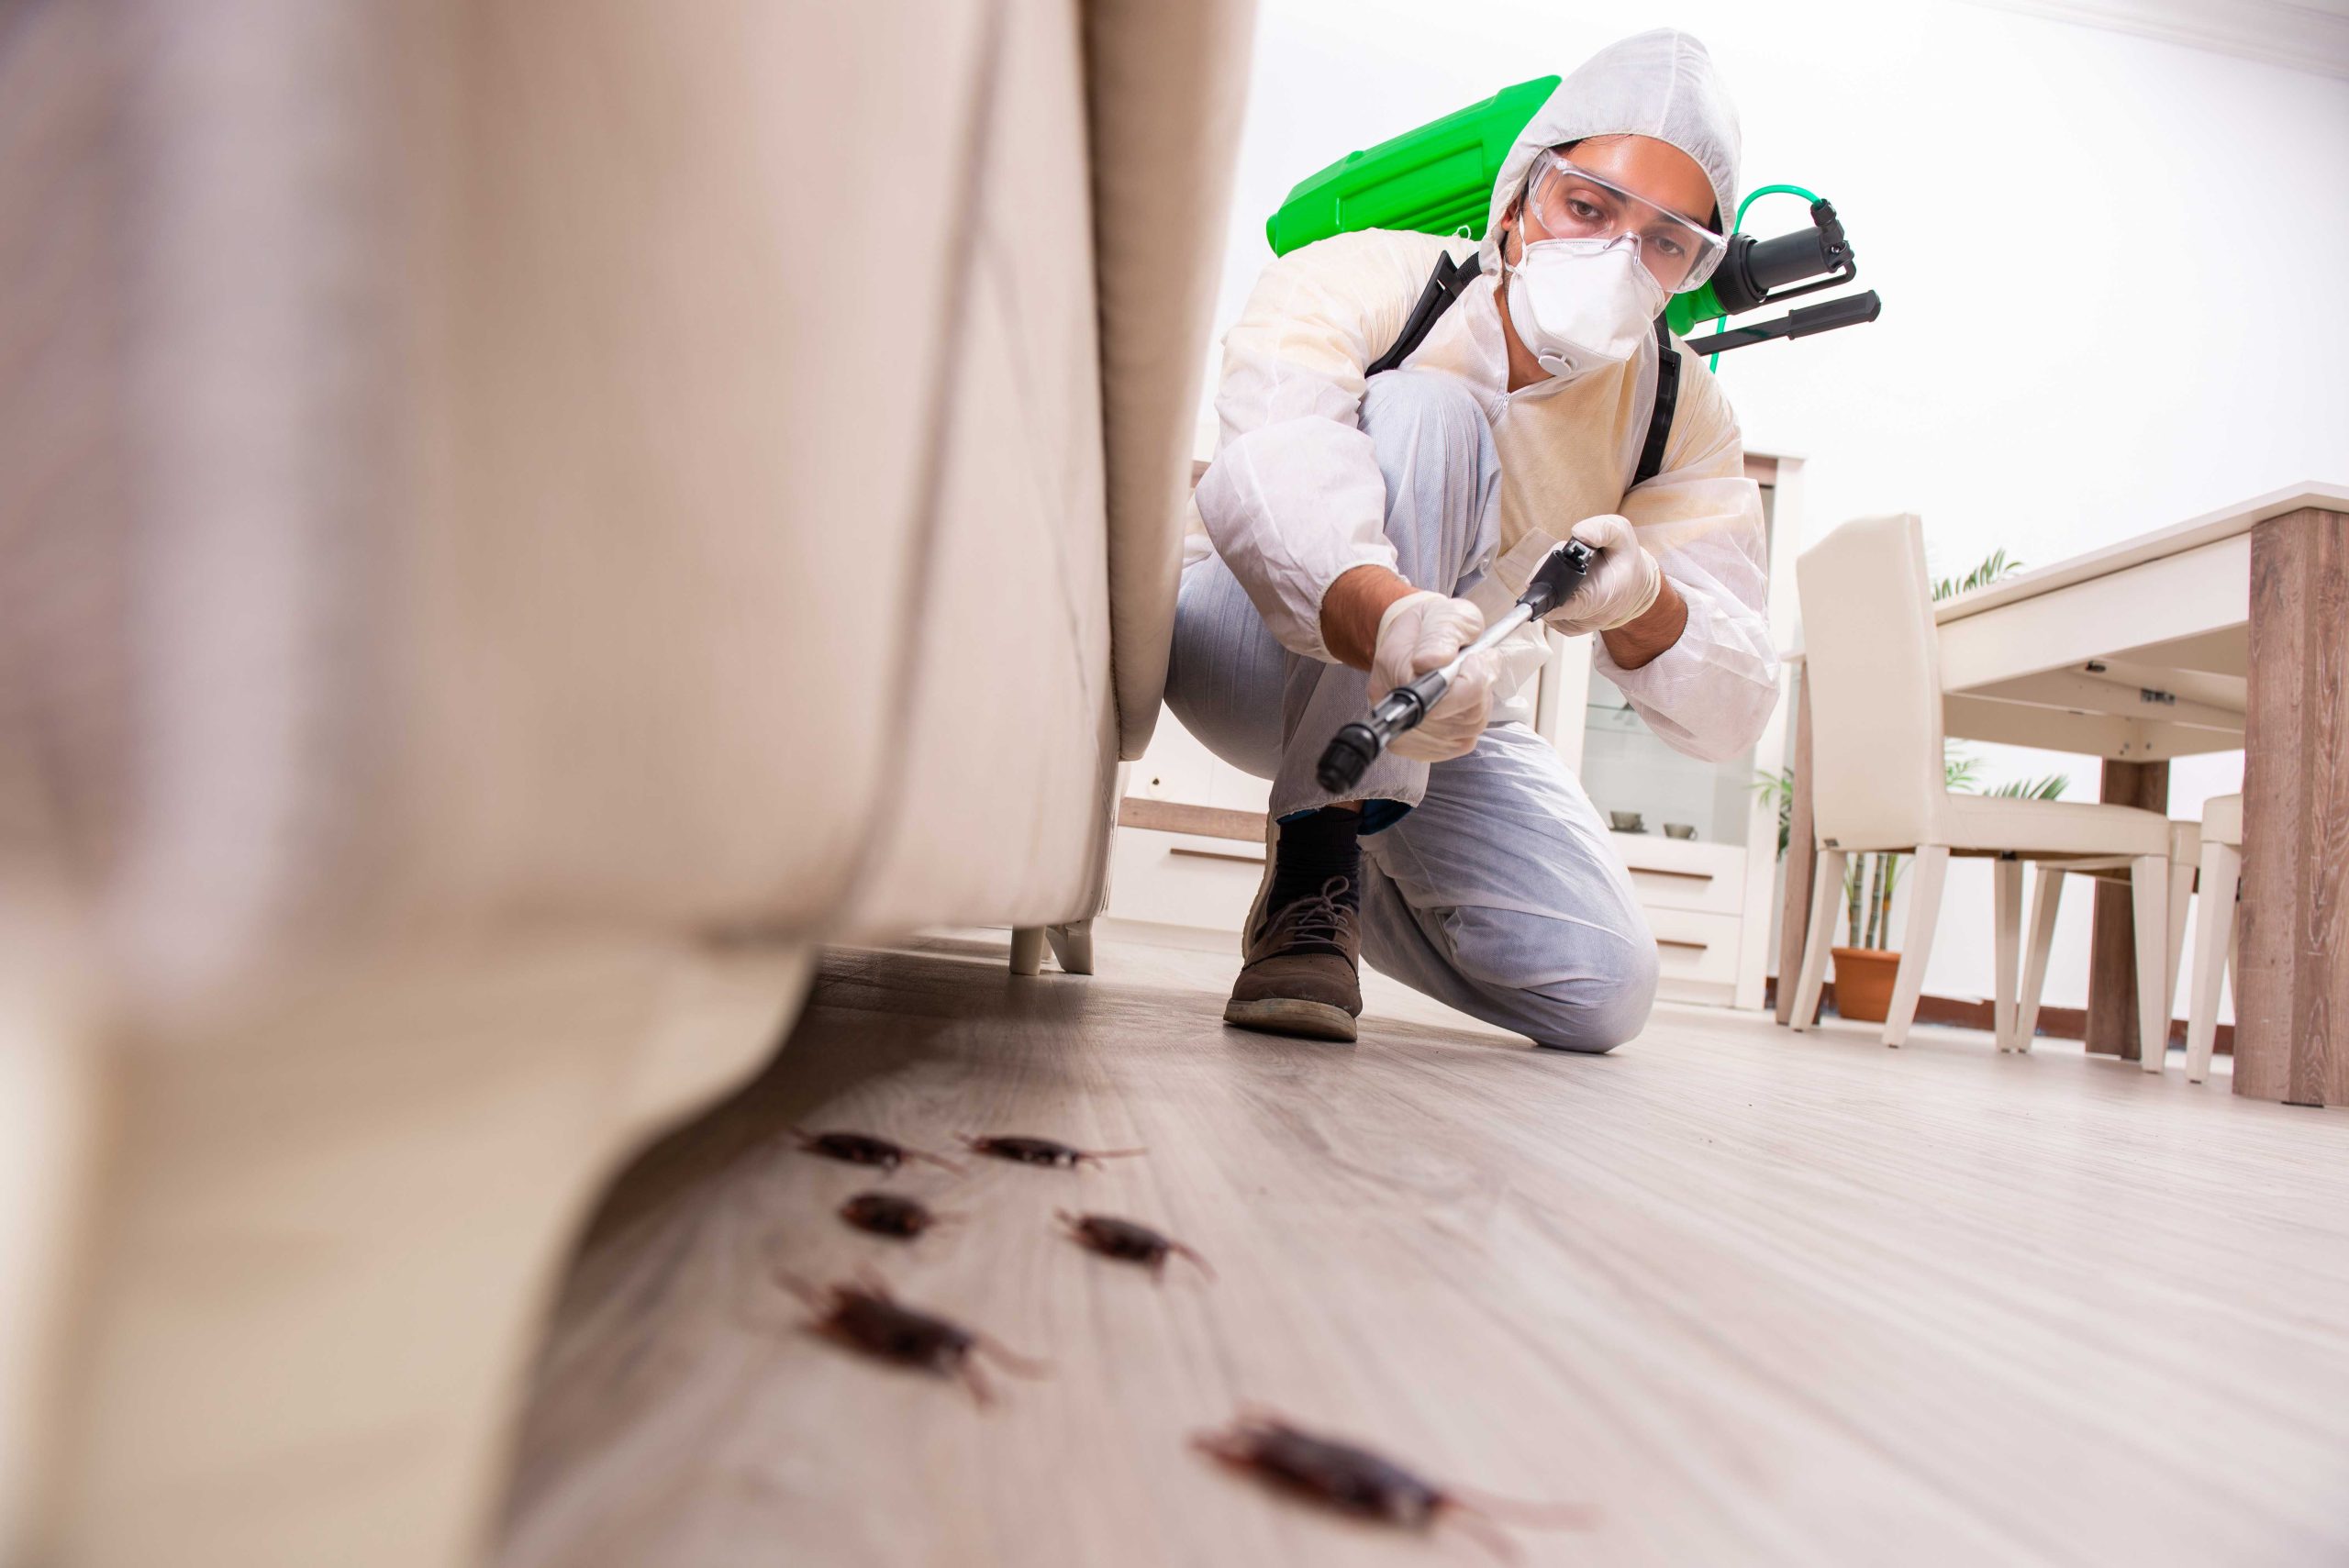 Pest-Control experts in Salem specializing in prevention and eradication of various pests. Don't let pests damage your property and endanger your health.